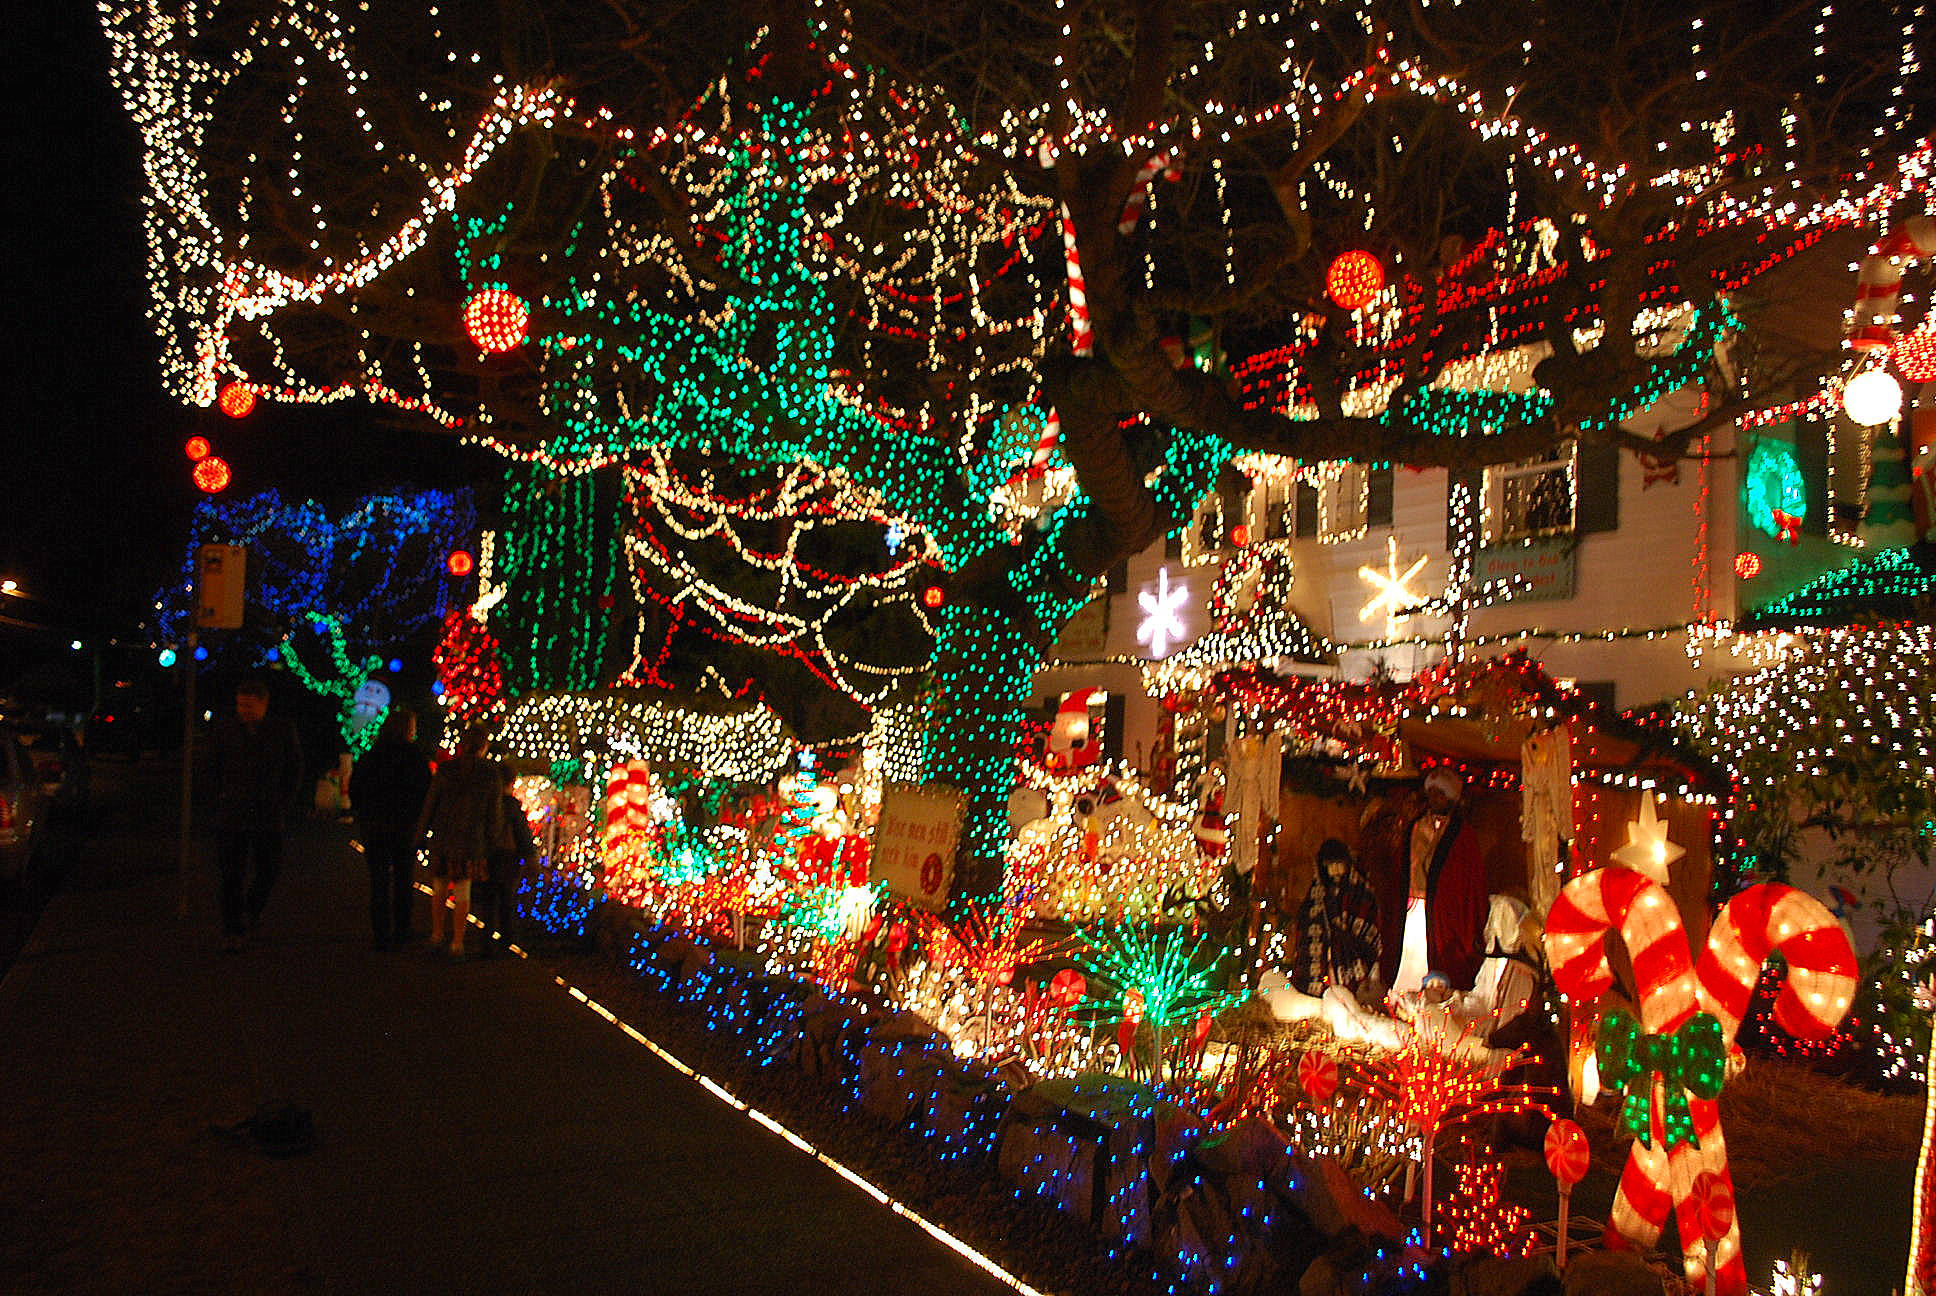 If you can spread half as much spirit as the Menashe house in West Seattle (5605 Beach Dr. SW), it should be a winning holiday season. Photo by Joe Wolf/Flickr